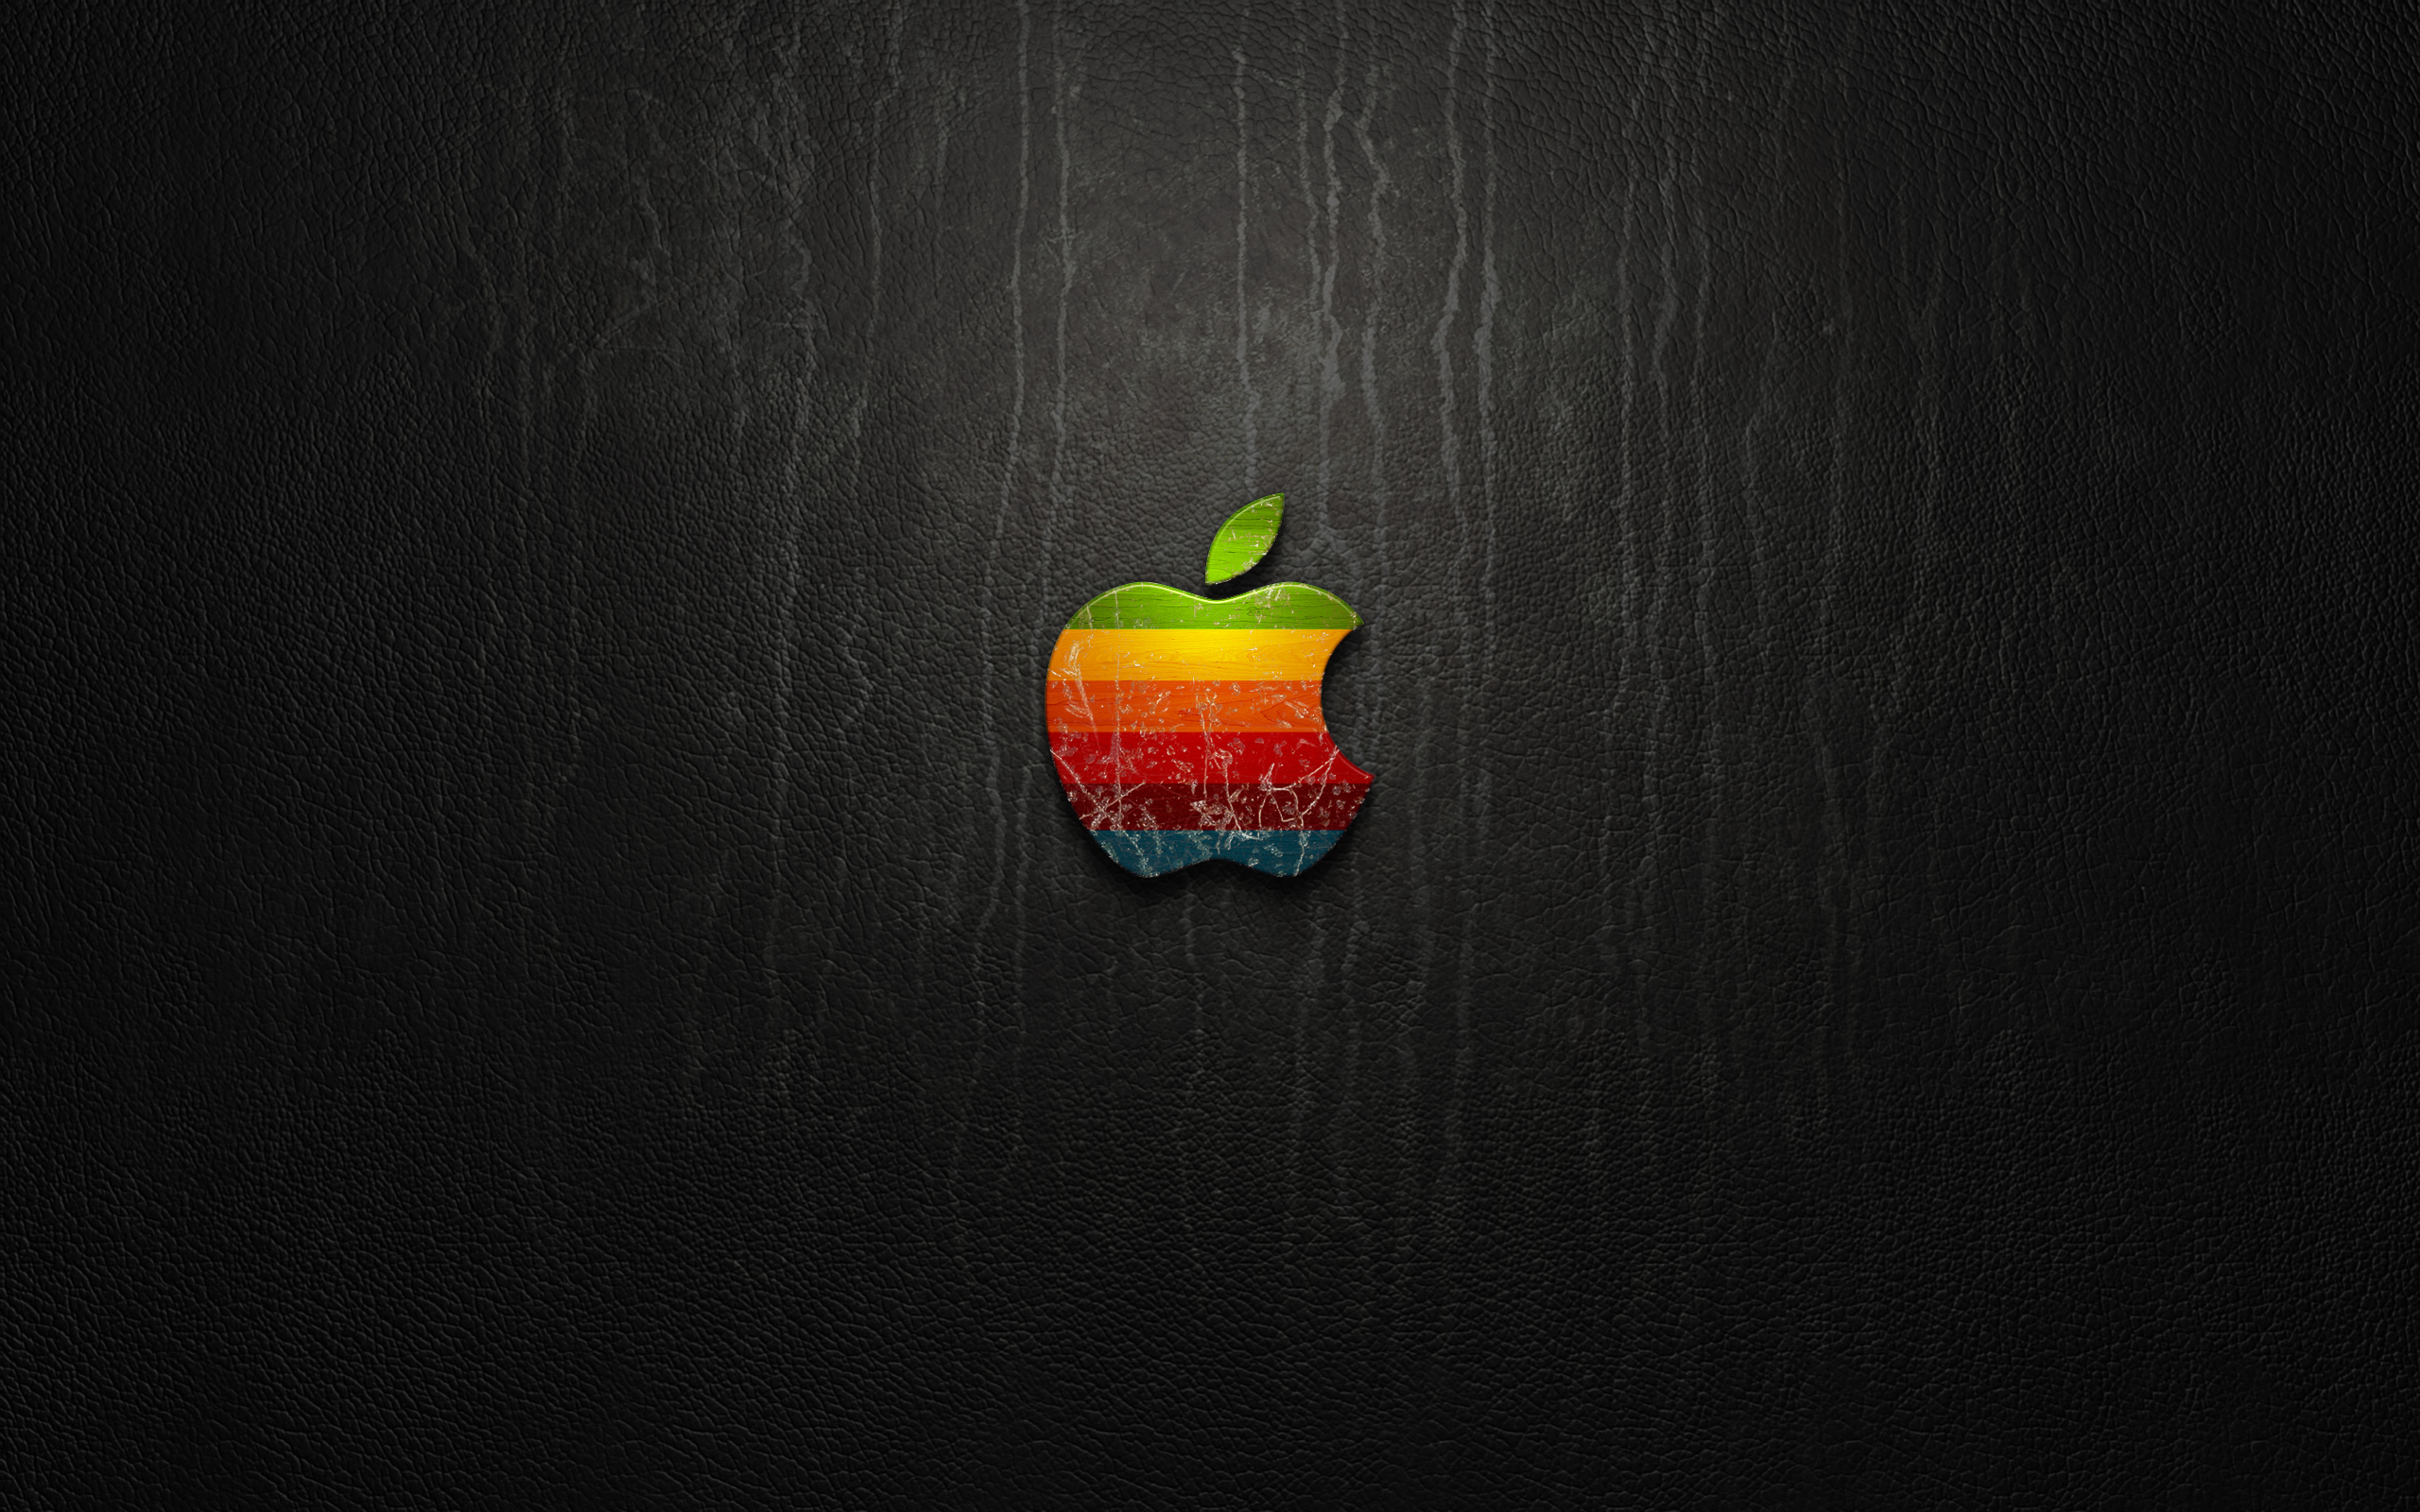 Apple Logo Wallpapers HD | Wallpapers, Backgrounds, Images, Art ...